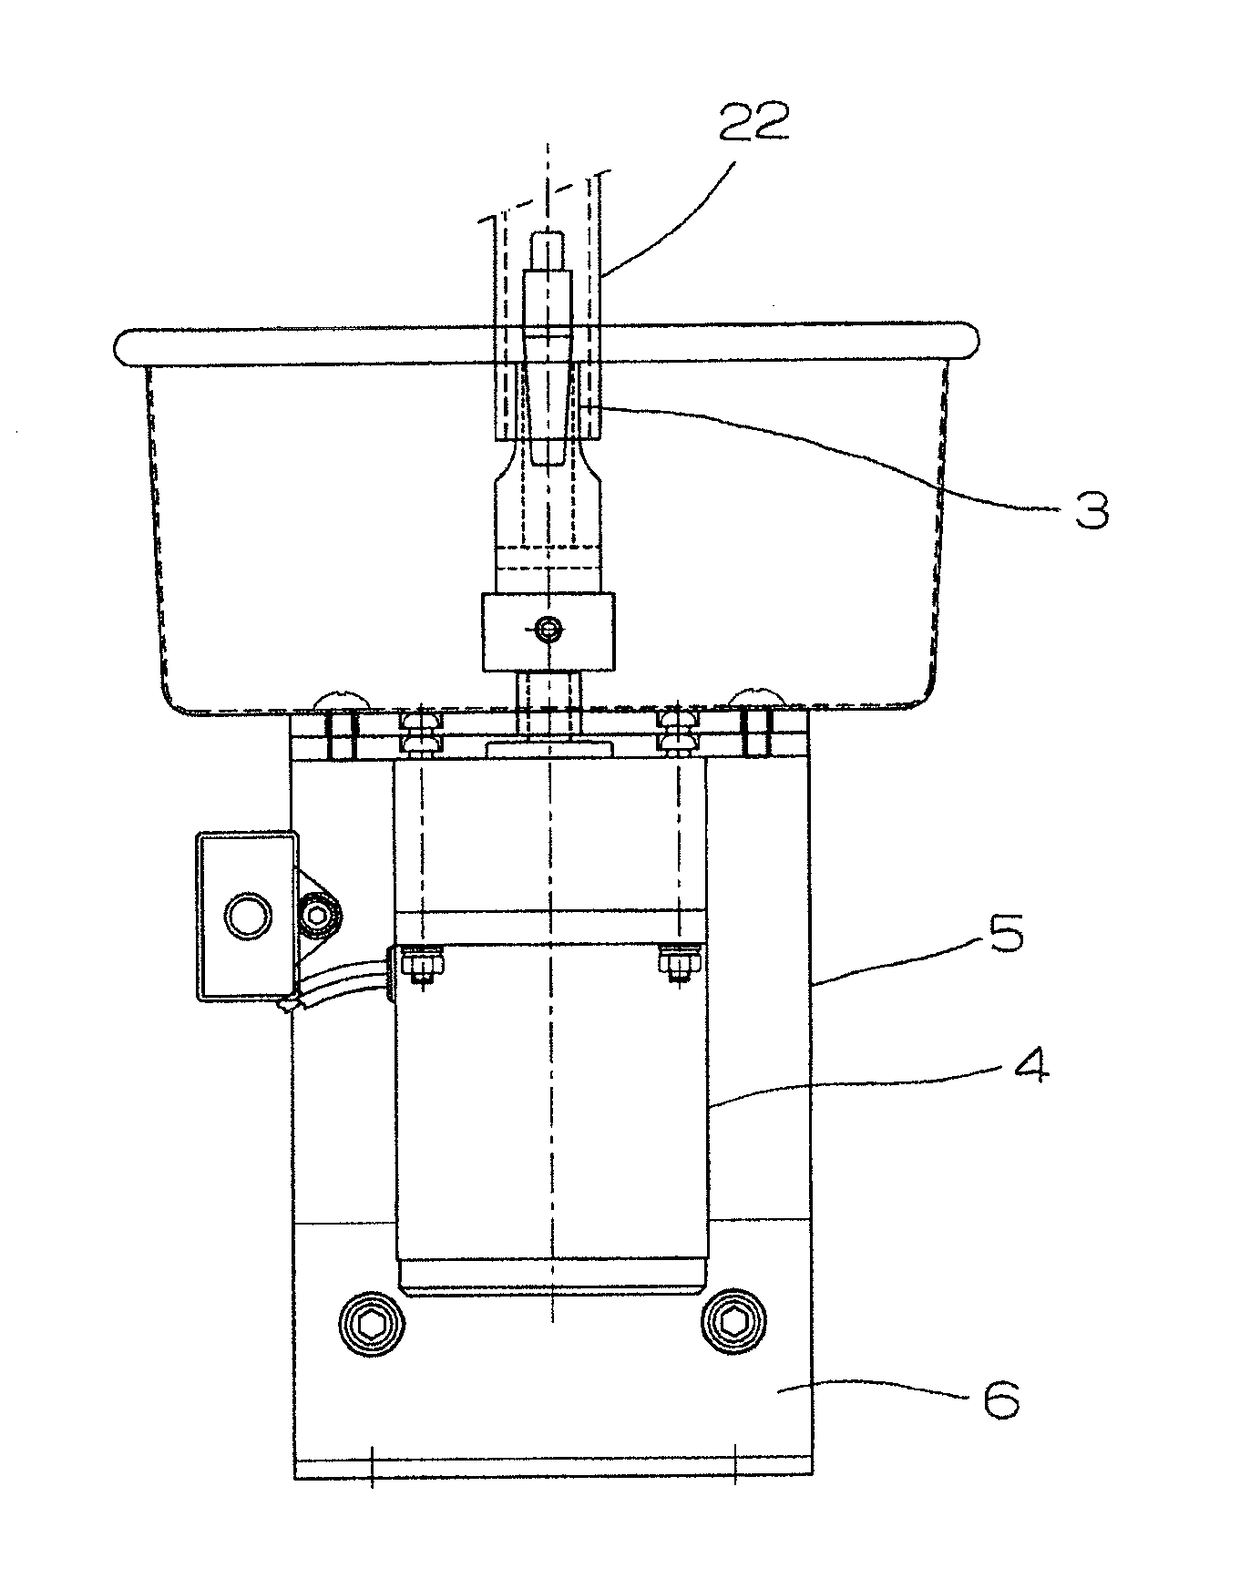 Nozzle cleaner device